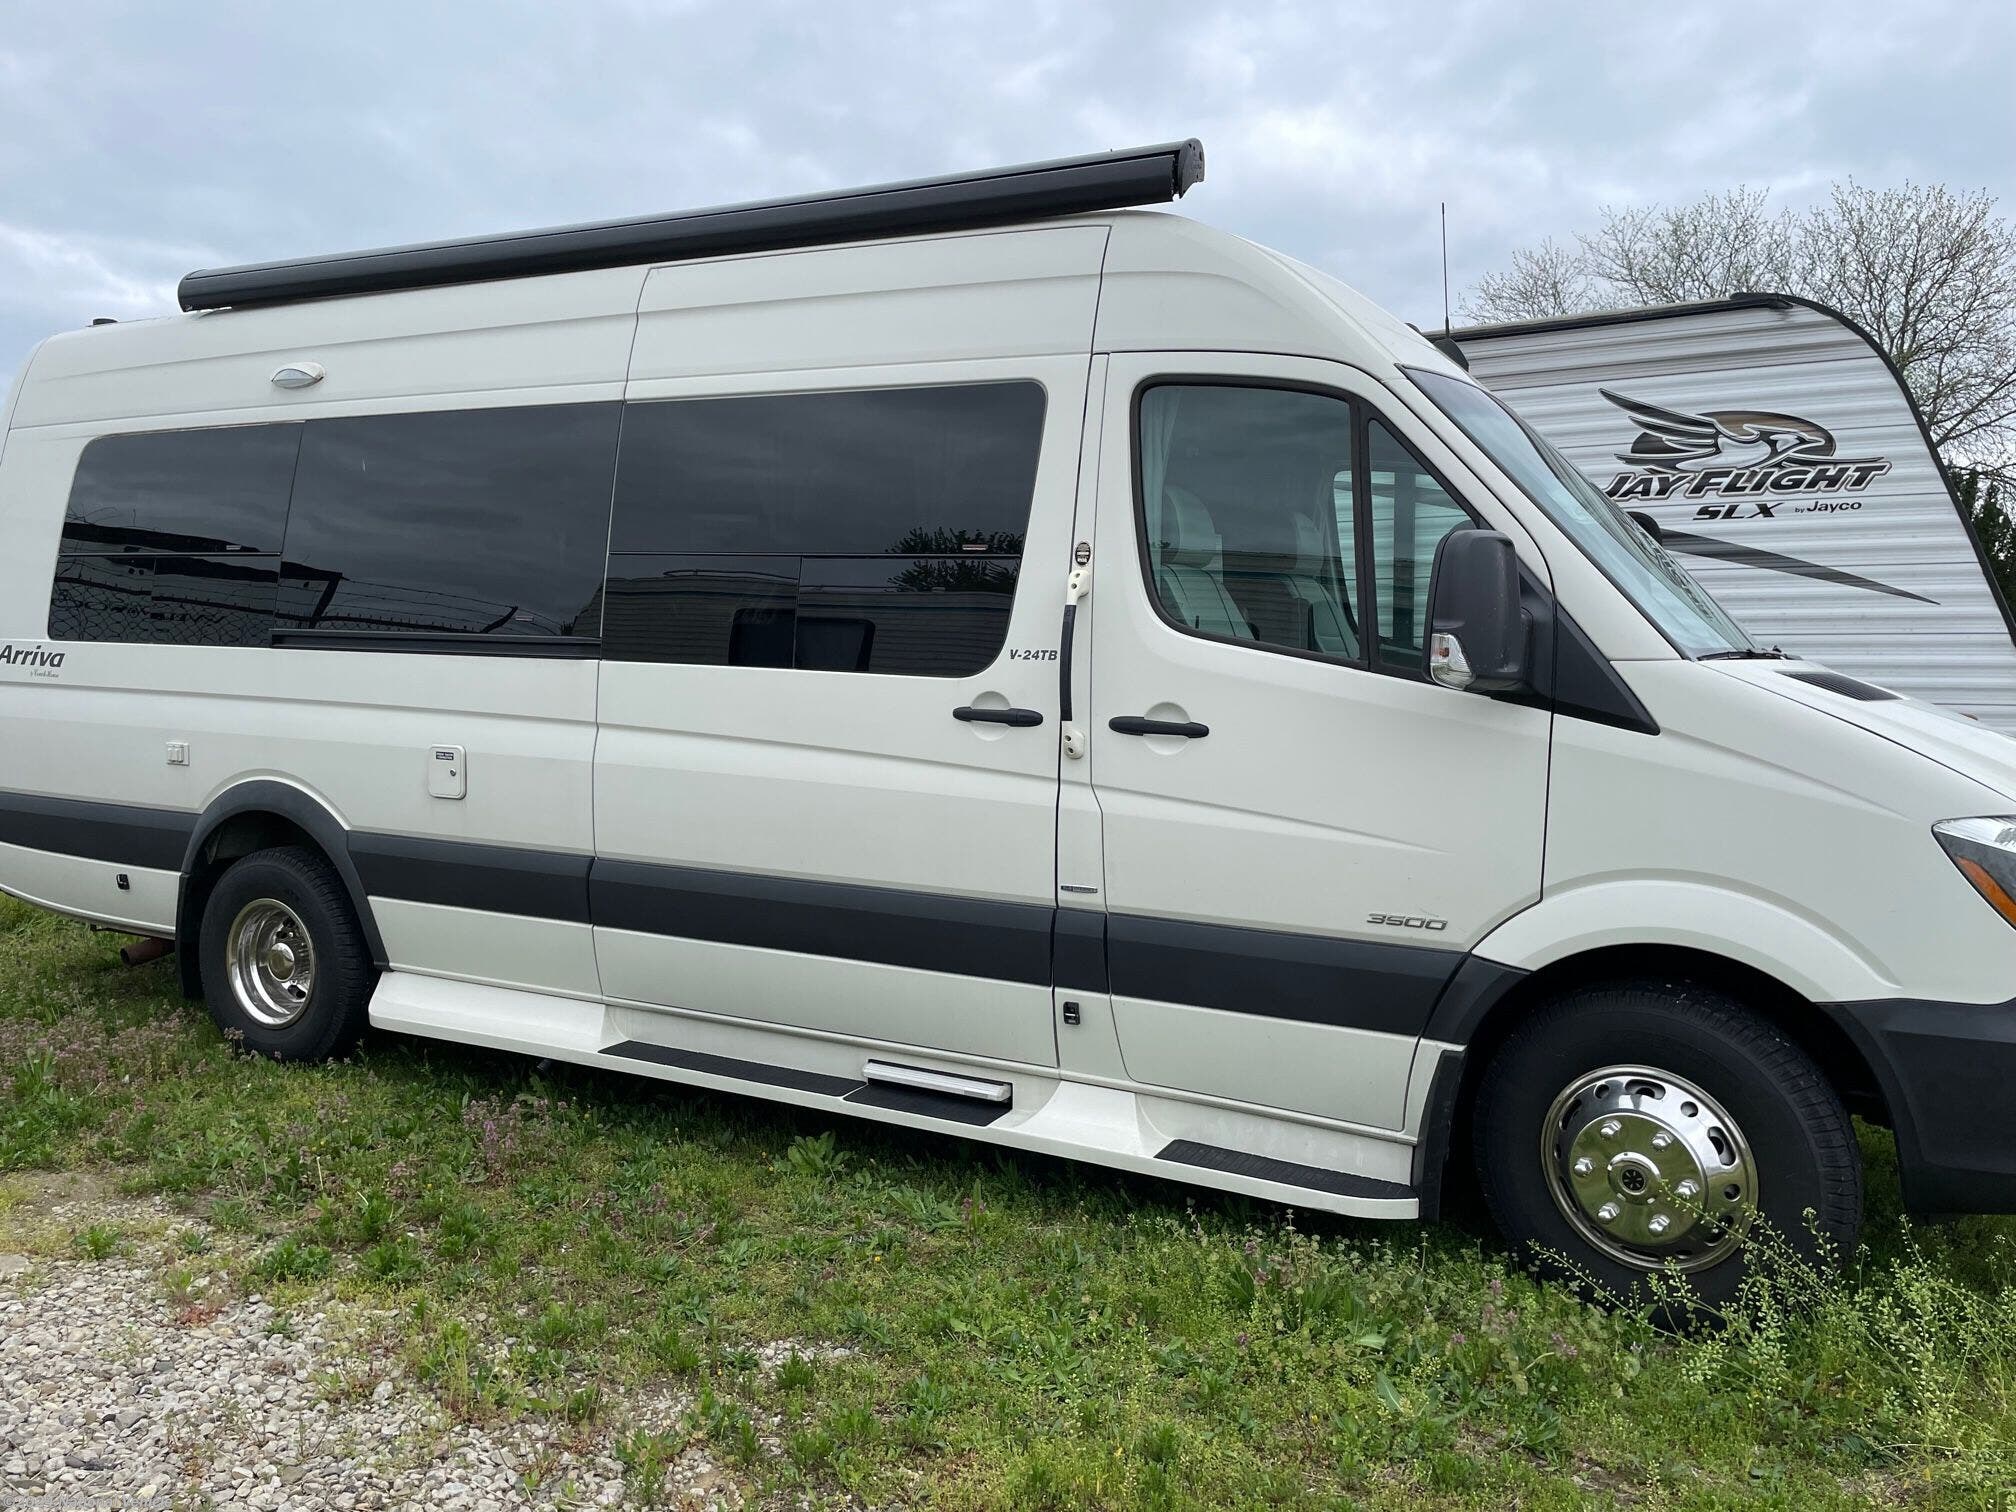 2015 Coach House Arriva 24-TB RV for Sale in Springdale, OH 45246 ...